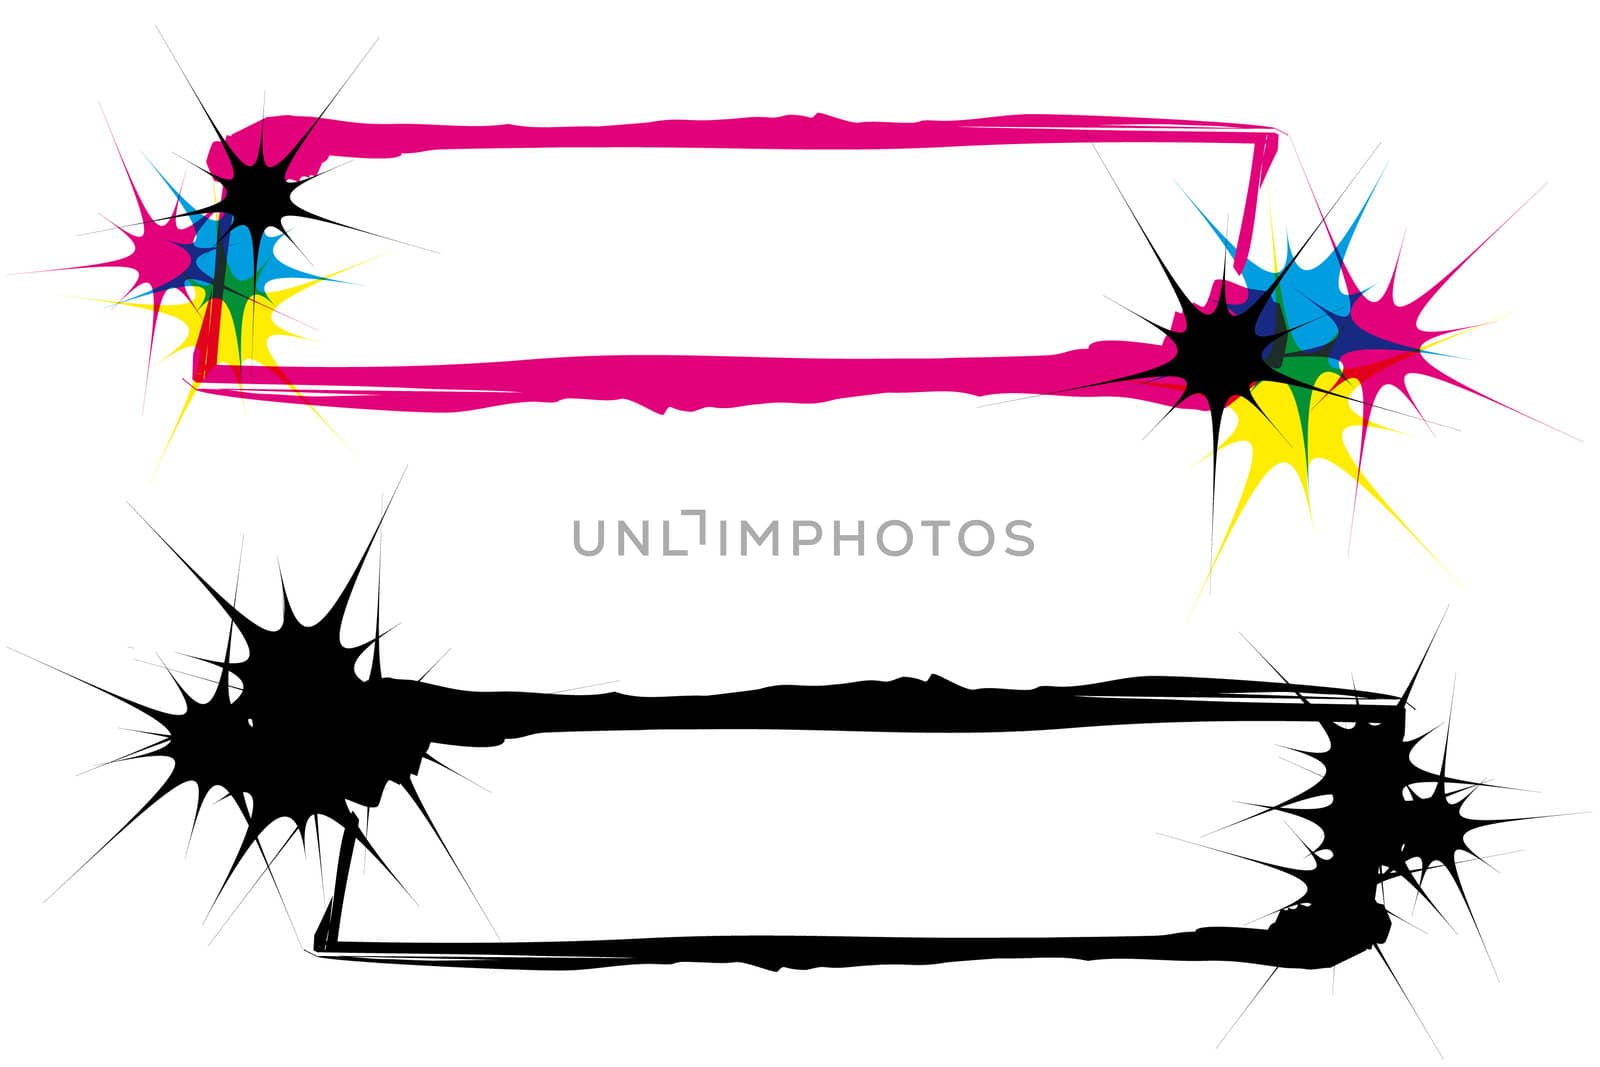 inkblots frames CMYK and silhouette by karinclaus